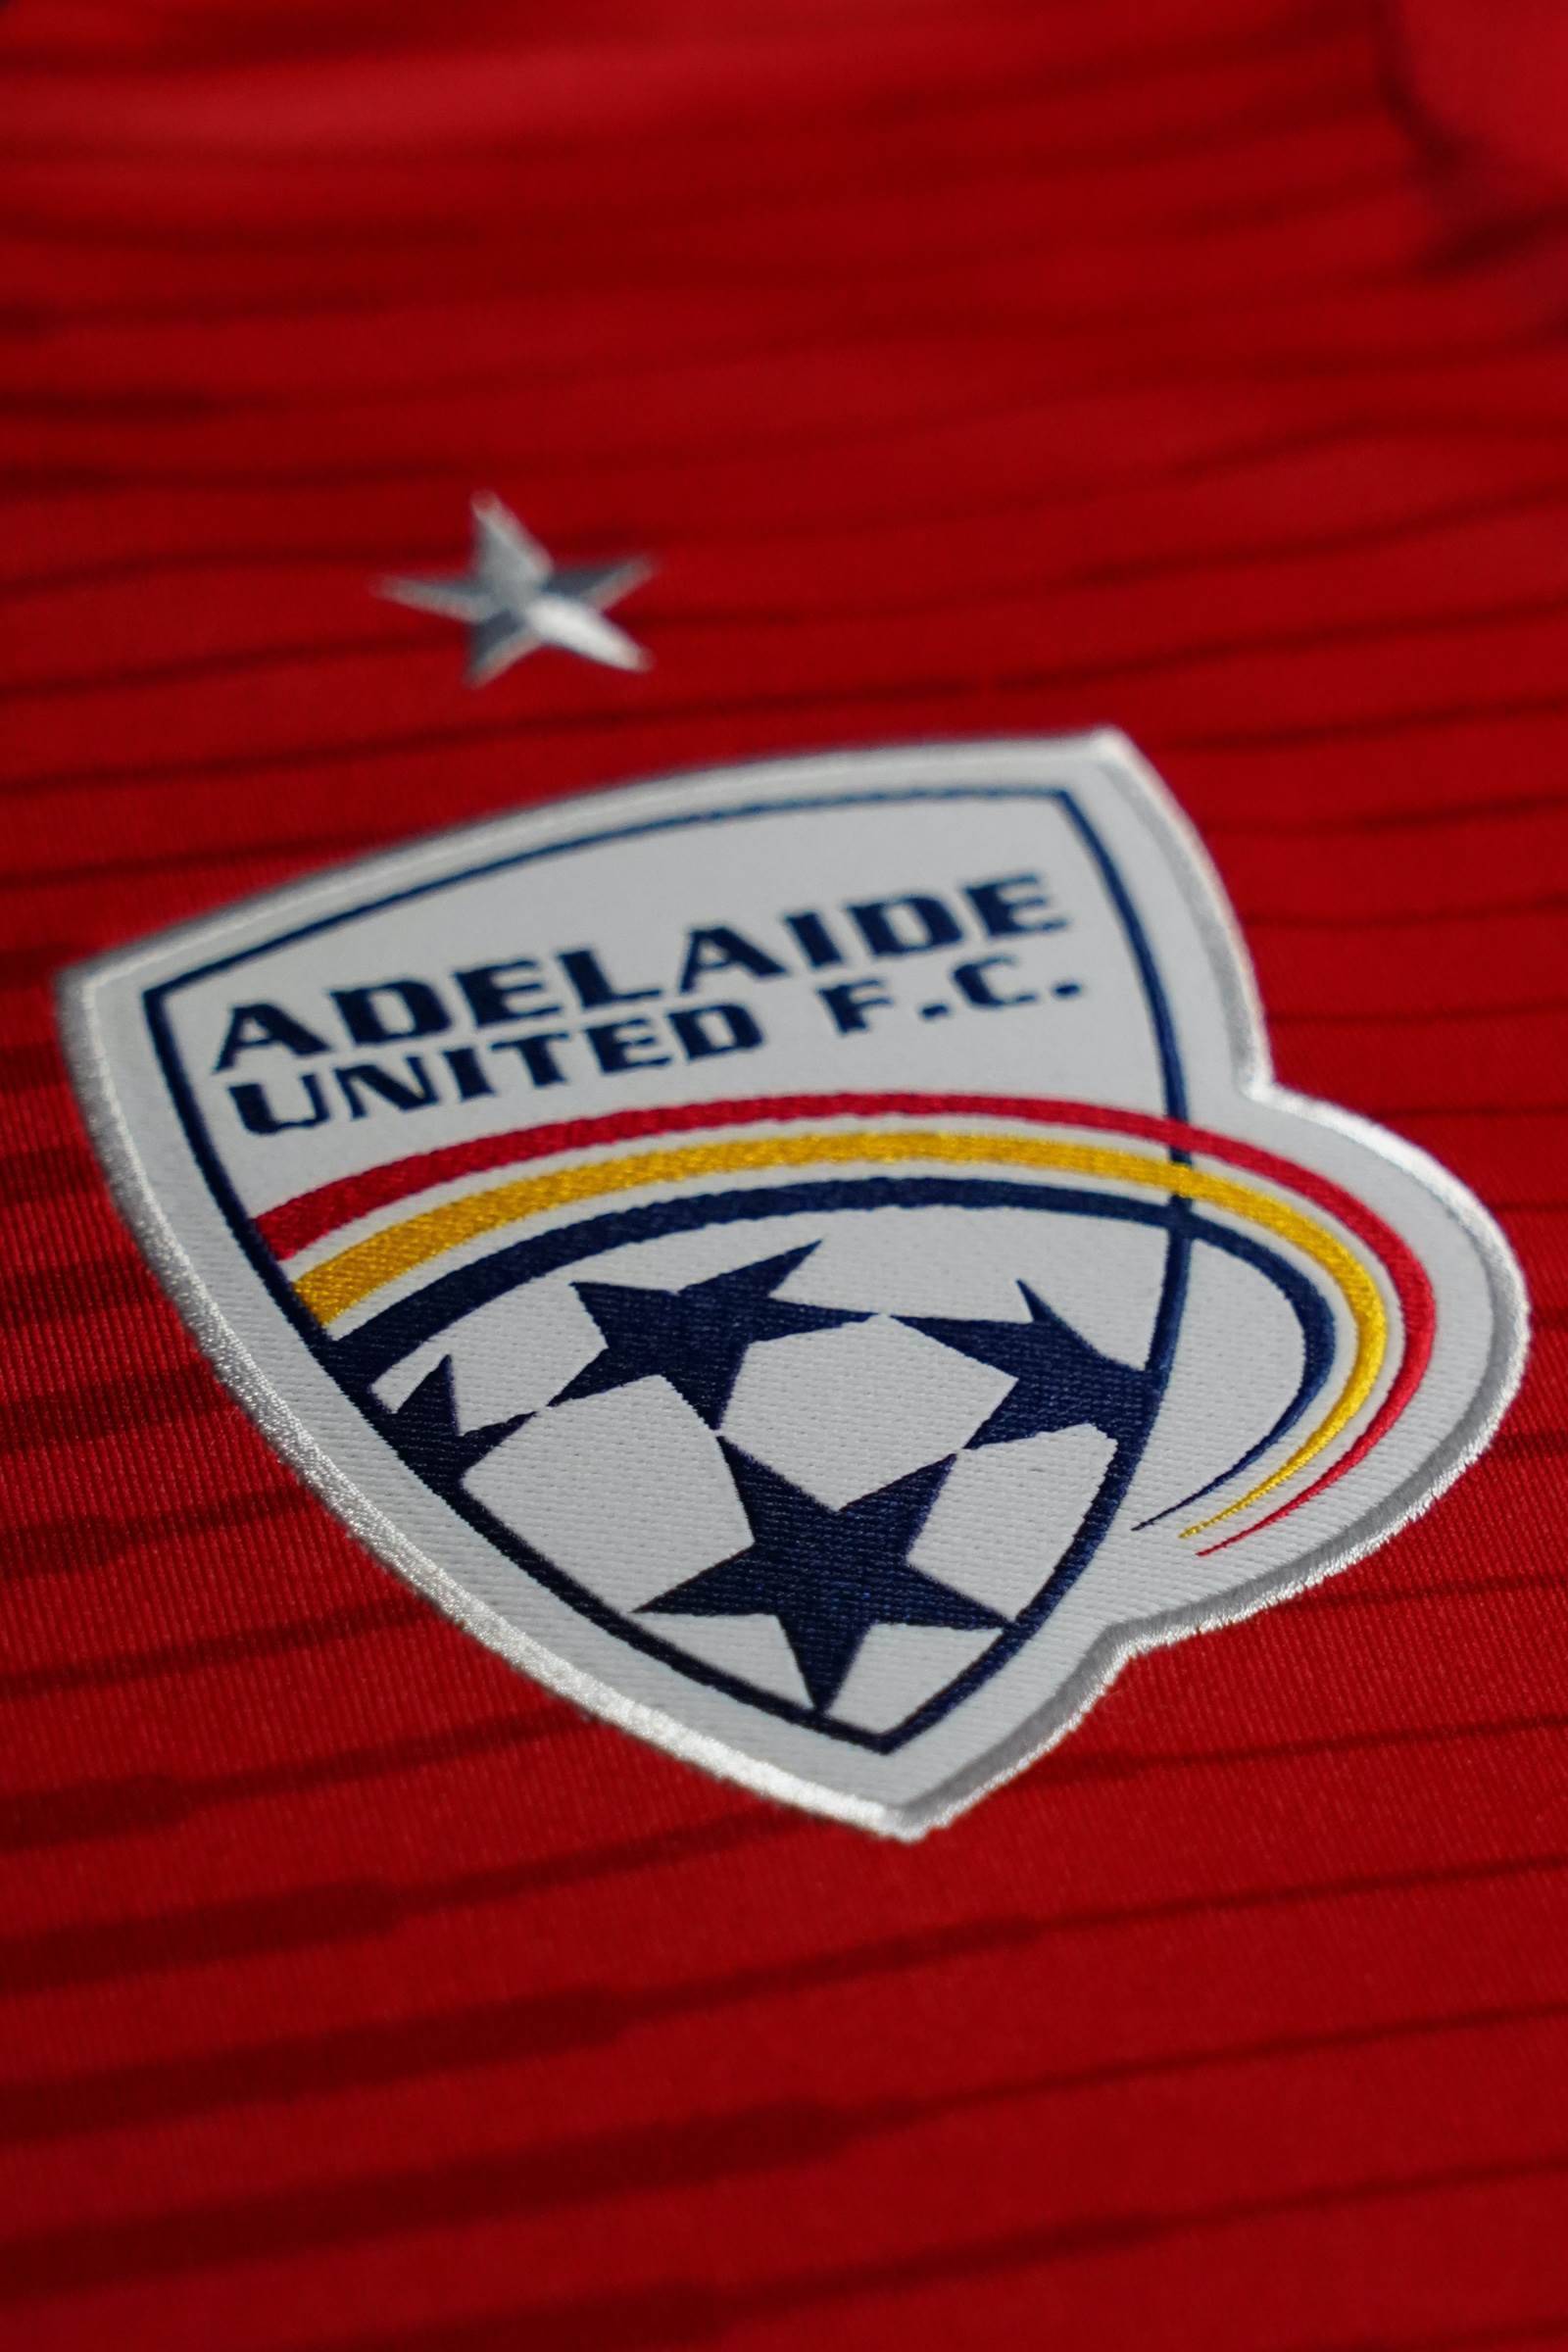 In pics: Adelaide United reveal new kit - FTBL | The home ...